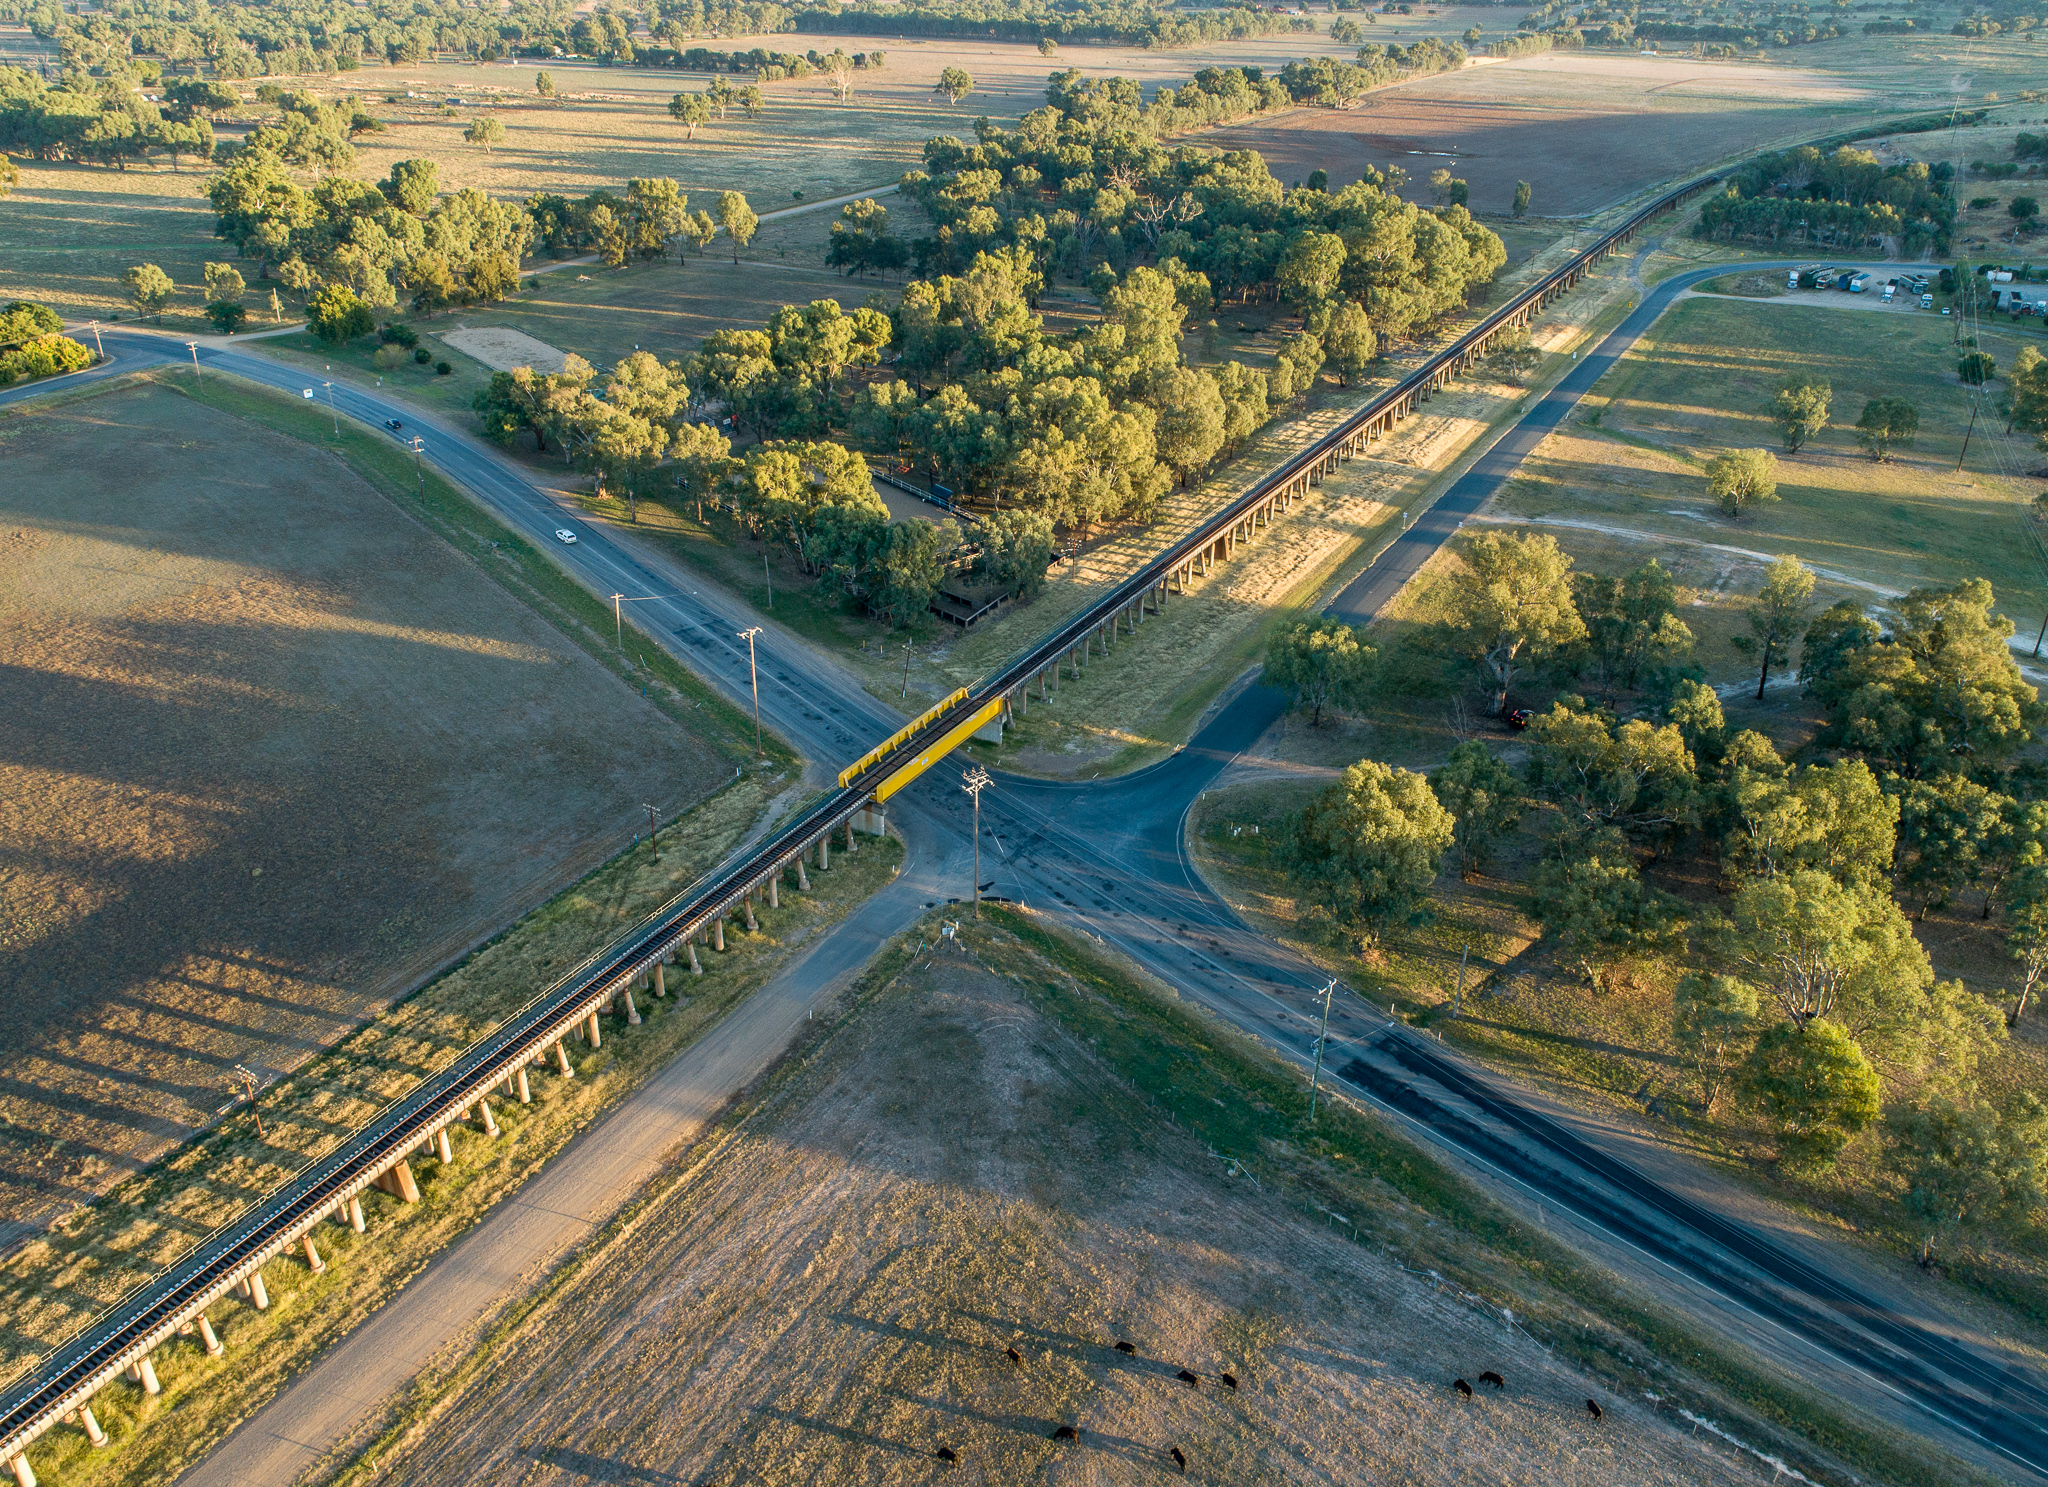 Aerial view of the Railway bridge over Oura Road, New South Wales.